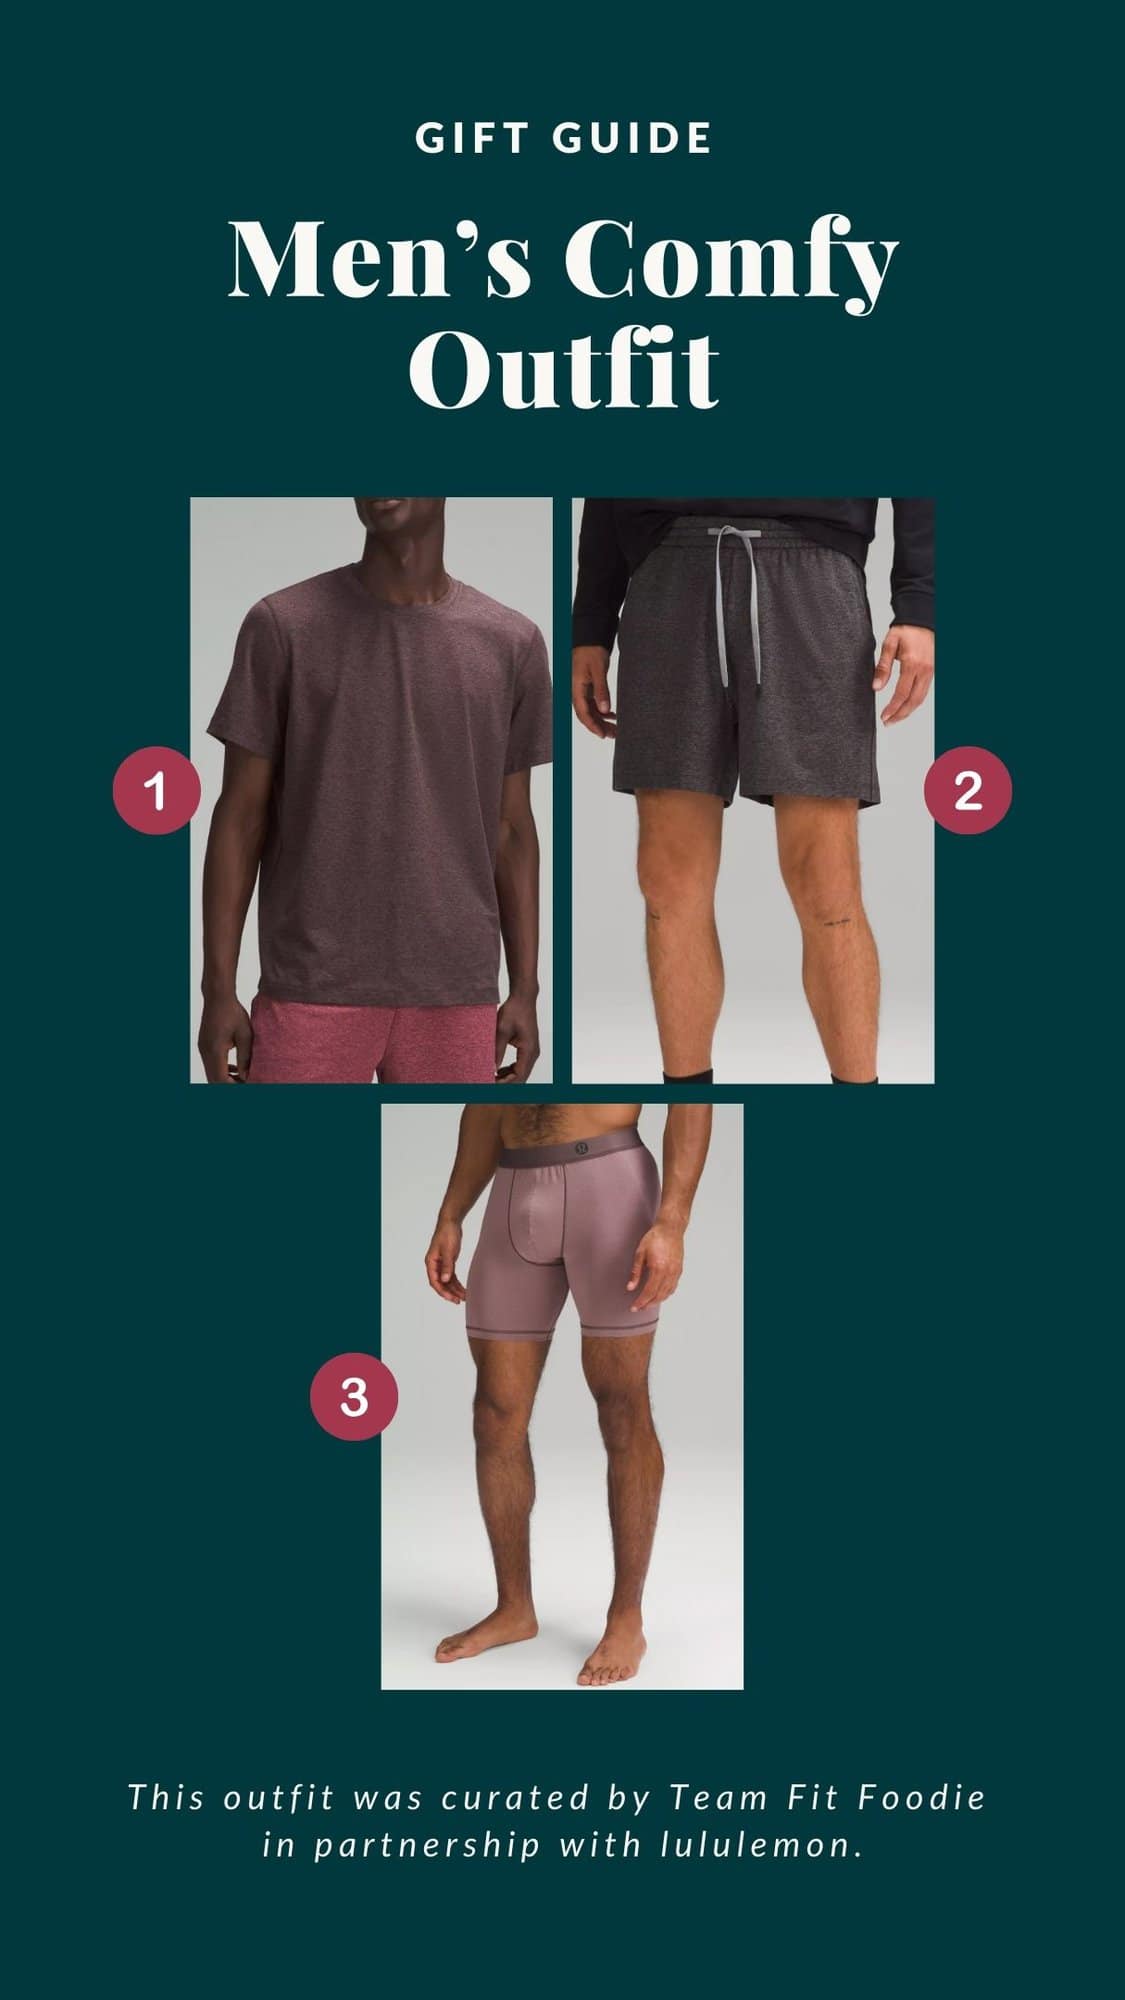 Men's comfy outfit gift guide.